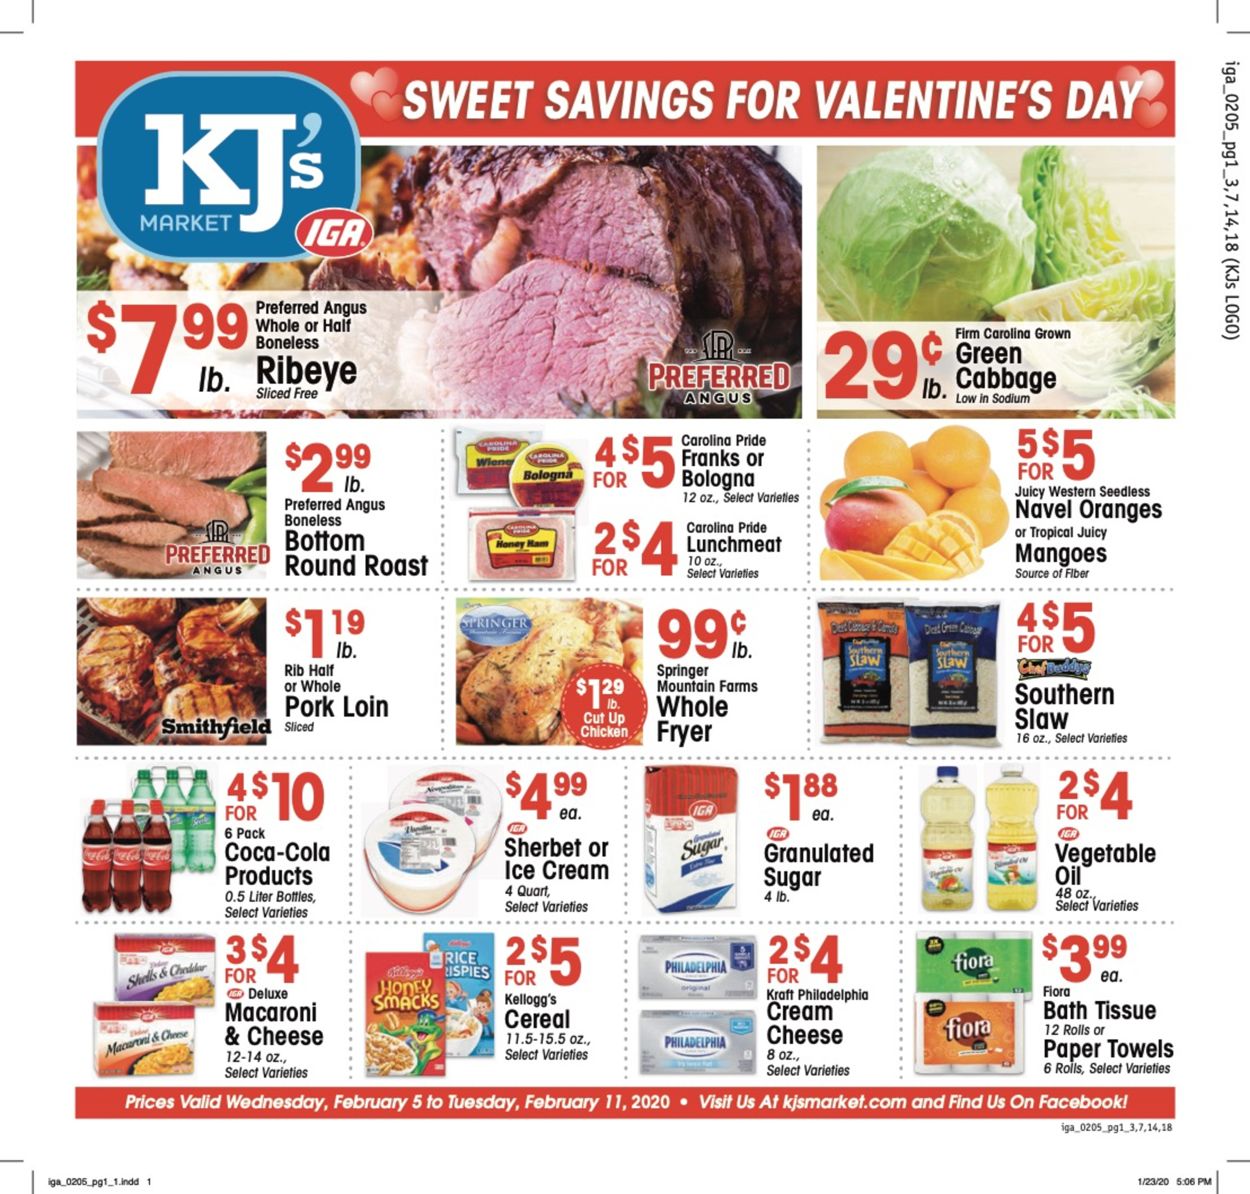 KJ´s Market Current weekly ad 02/05 - 02/11/2020 ...